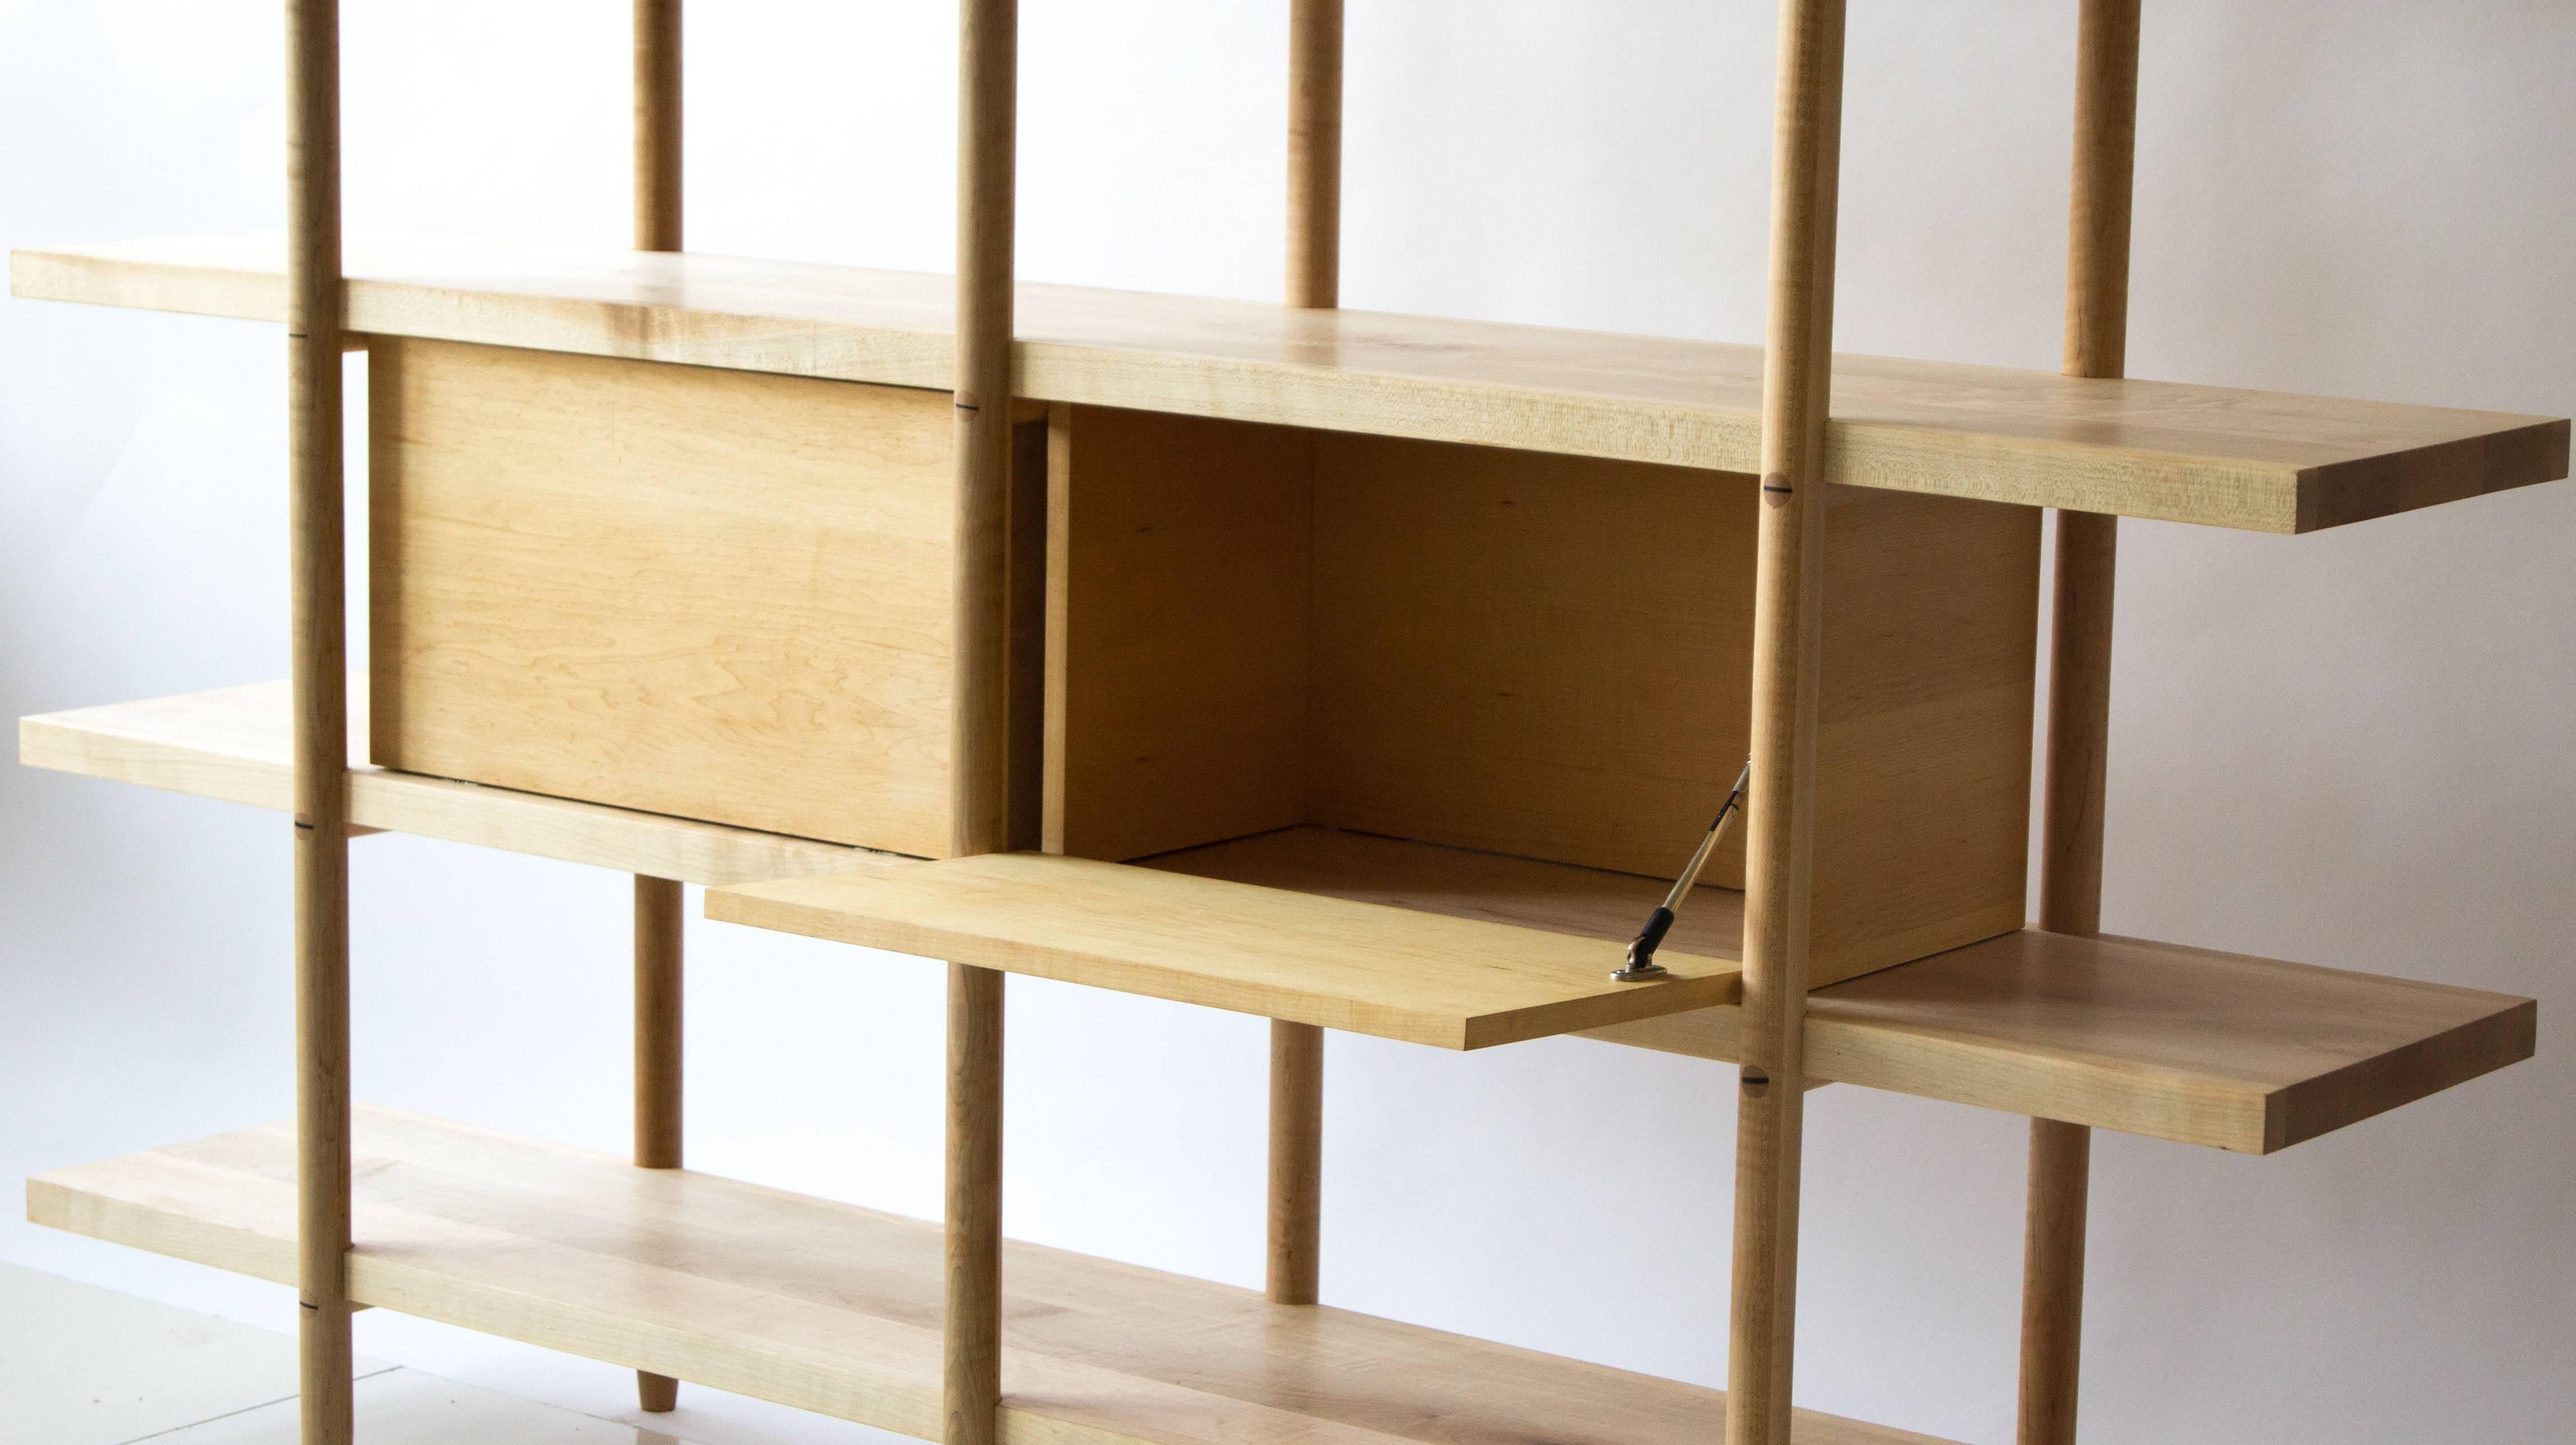 The Deepstep Shelving includes exquisite wood detailing and a clean, clear profile. Designed entirely without fasteners or screws, the design instead utilizes traditional and innovative wood joinery solutions. 

Designed and handmade with the